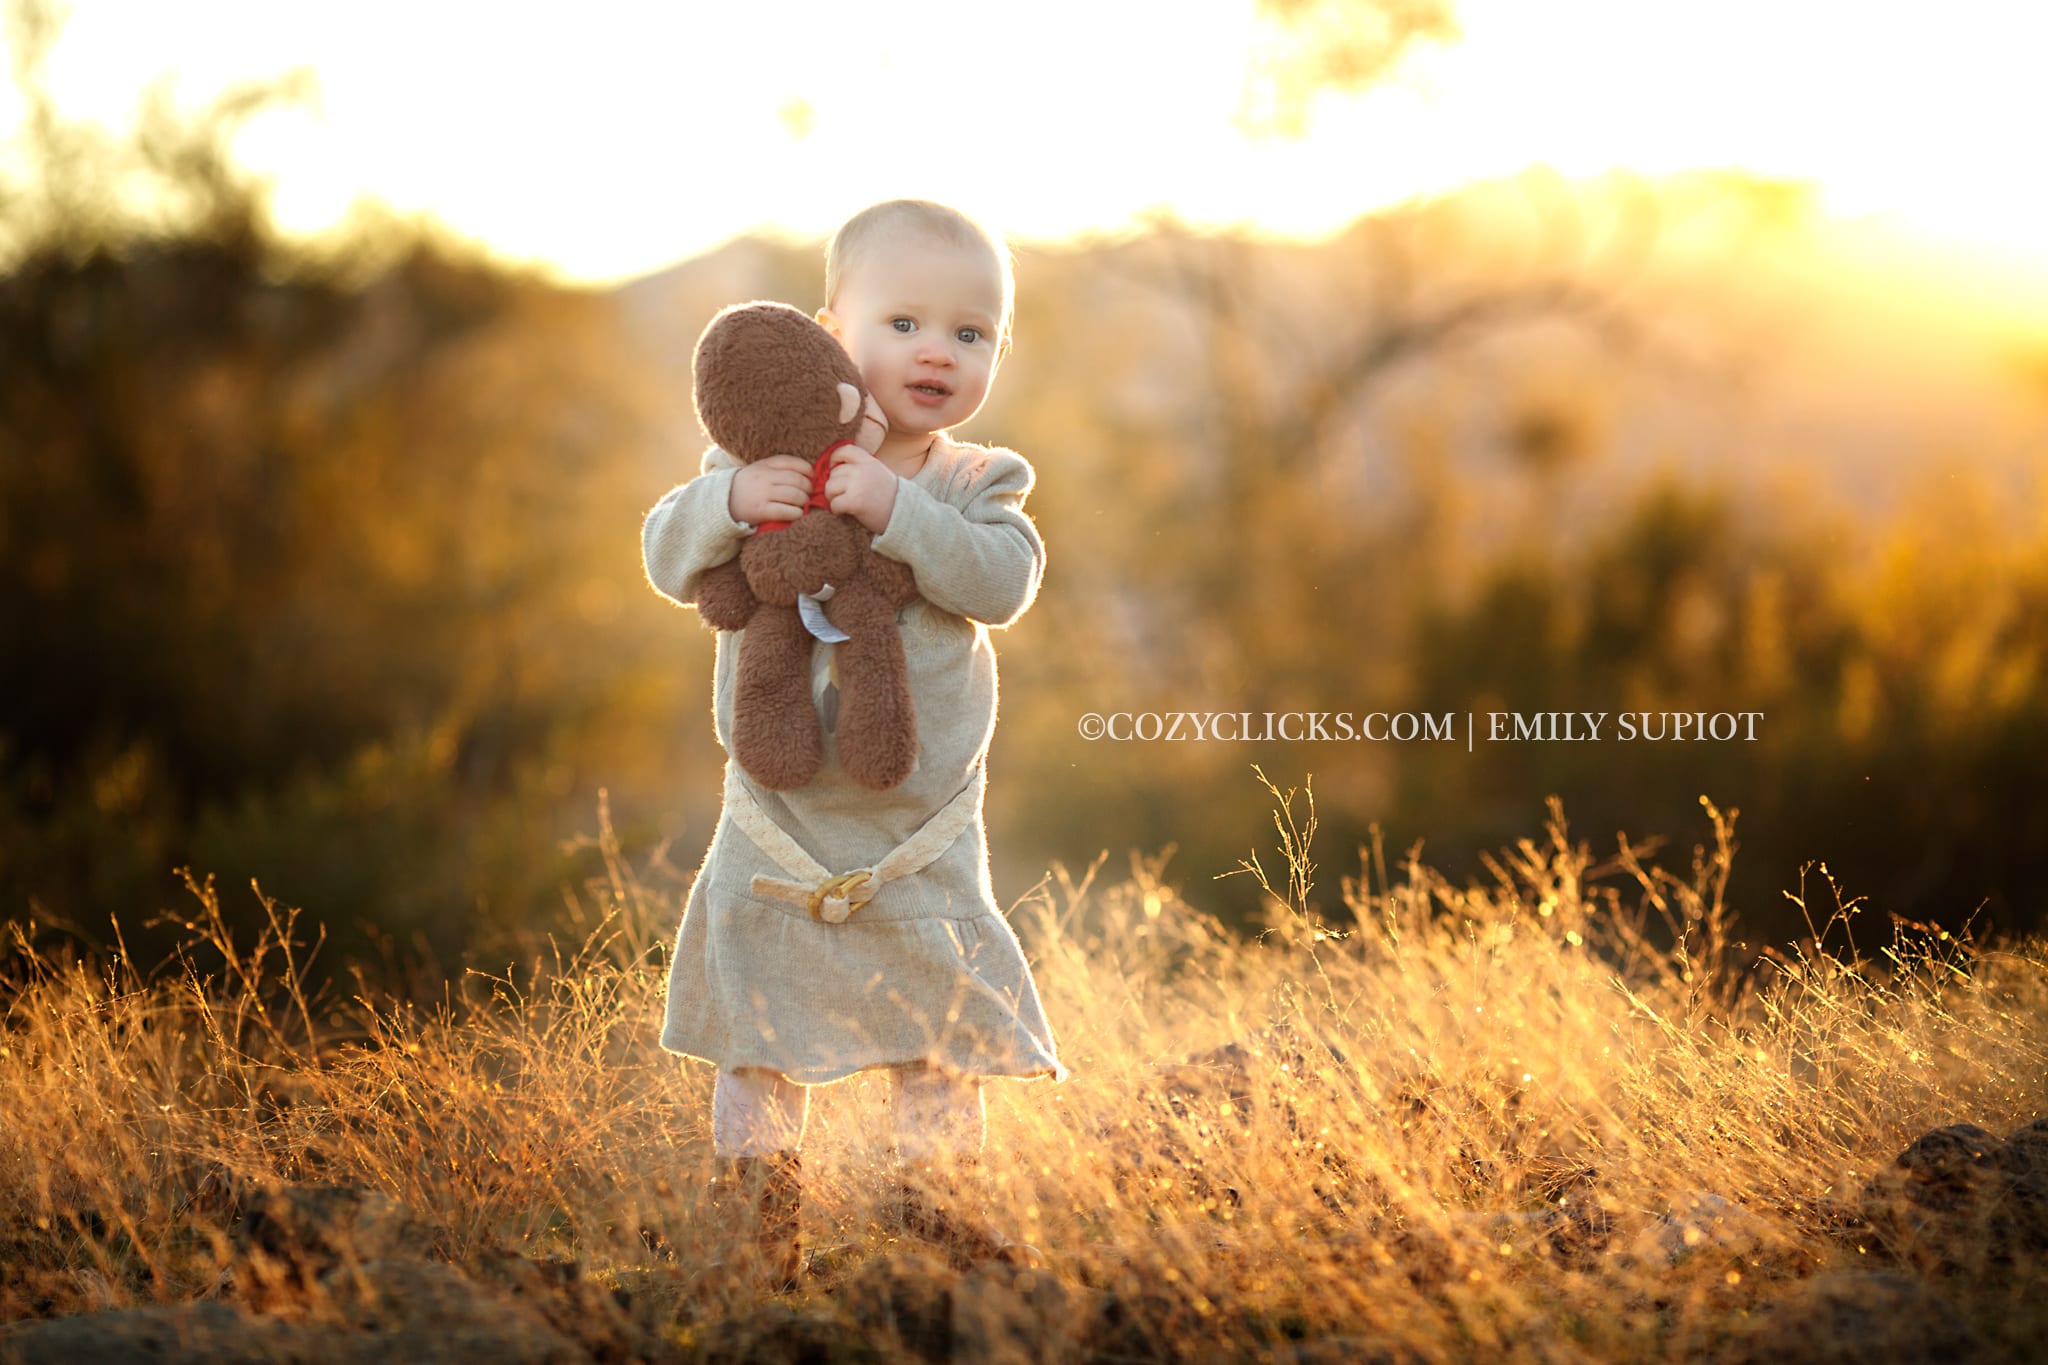 Phoneix children's photographer  Photography sessions near Ahwatukee